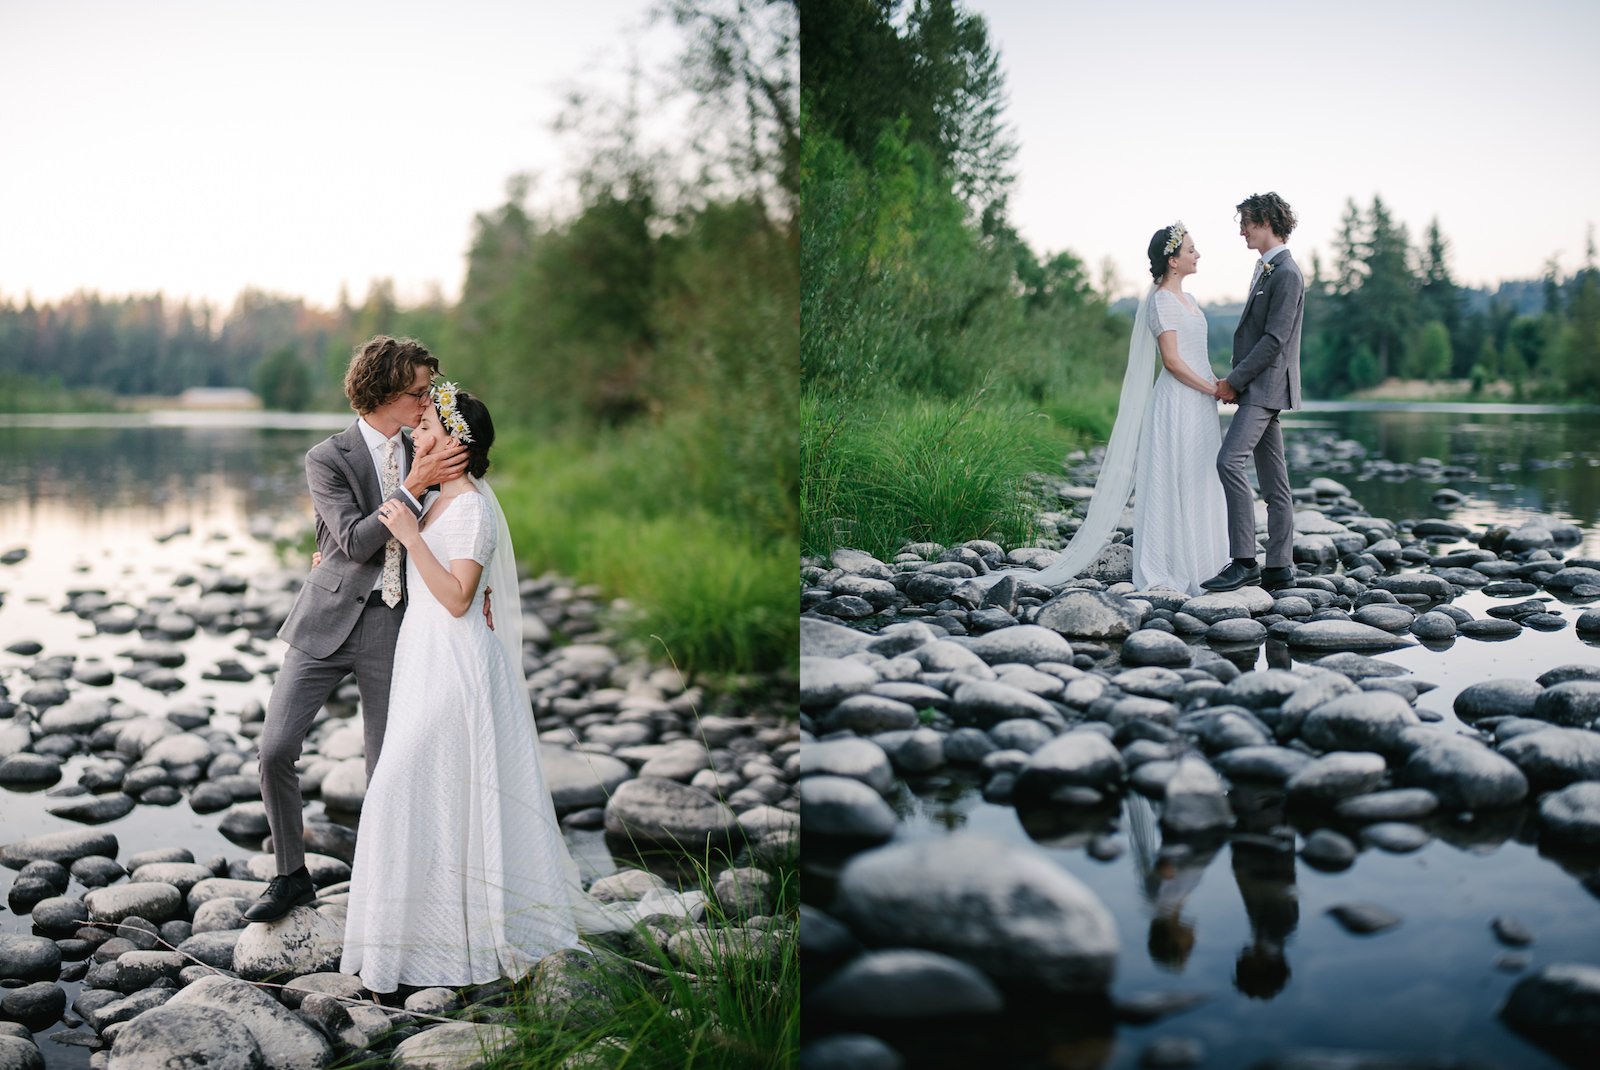  Wedding couple face each other on river bank pebbles with reflection of blue water 